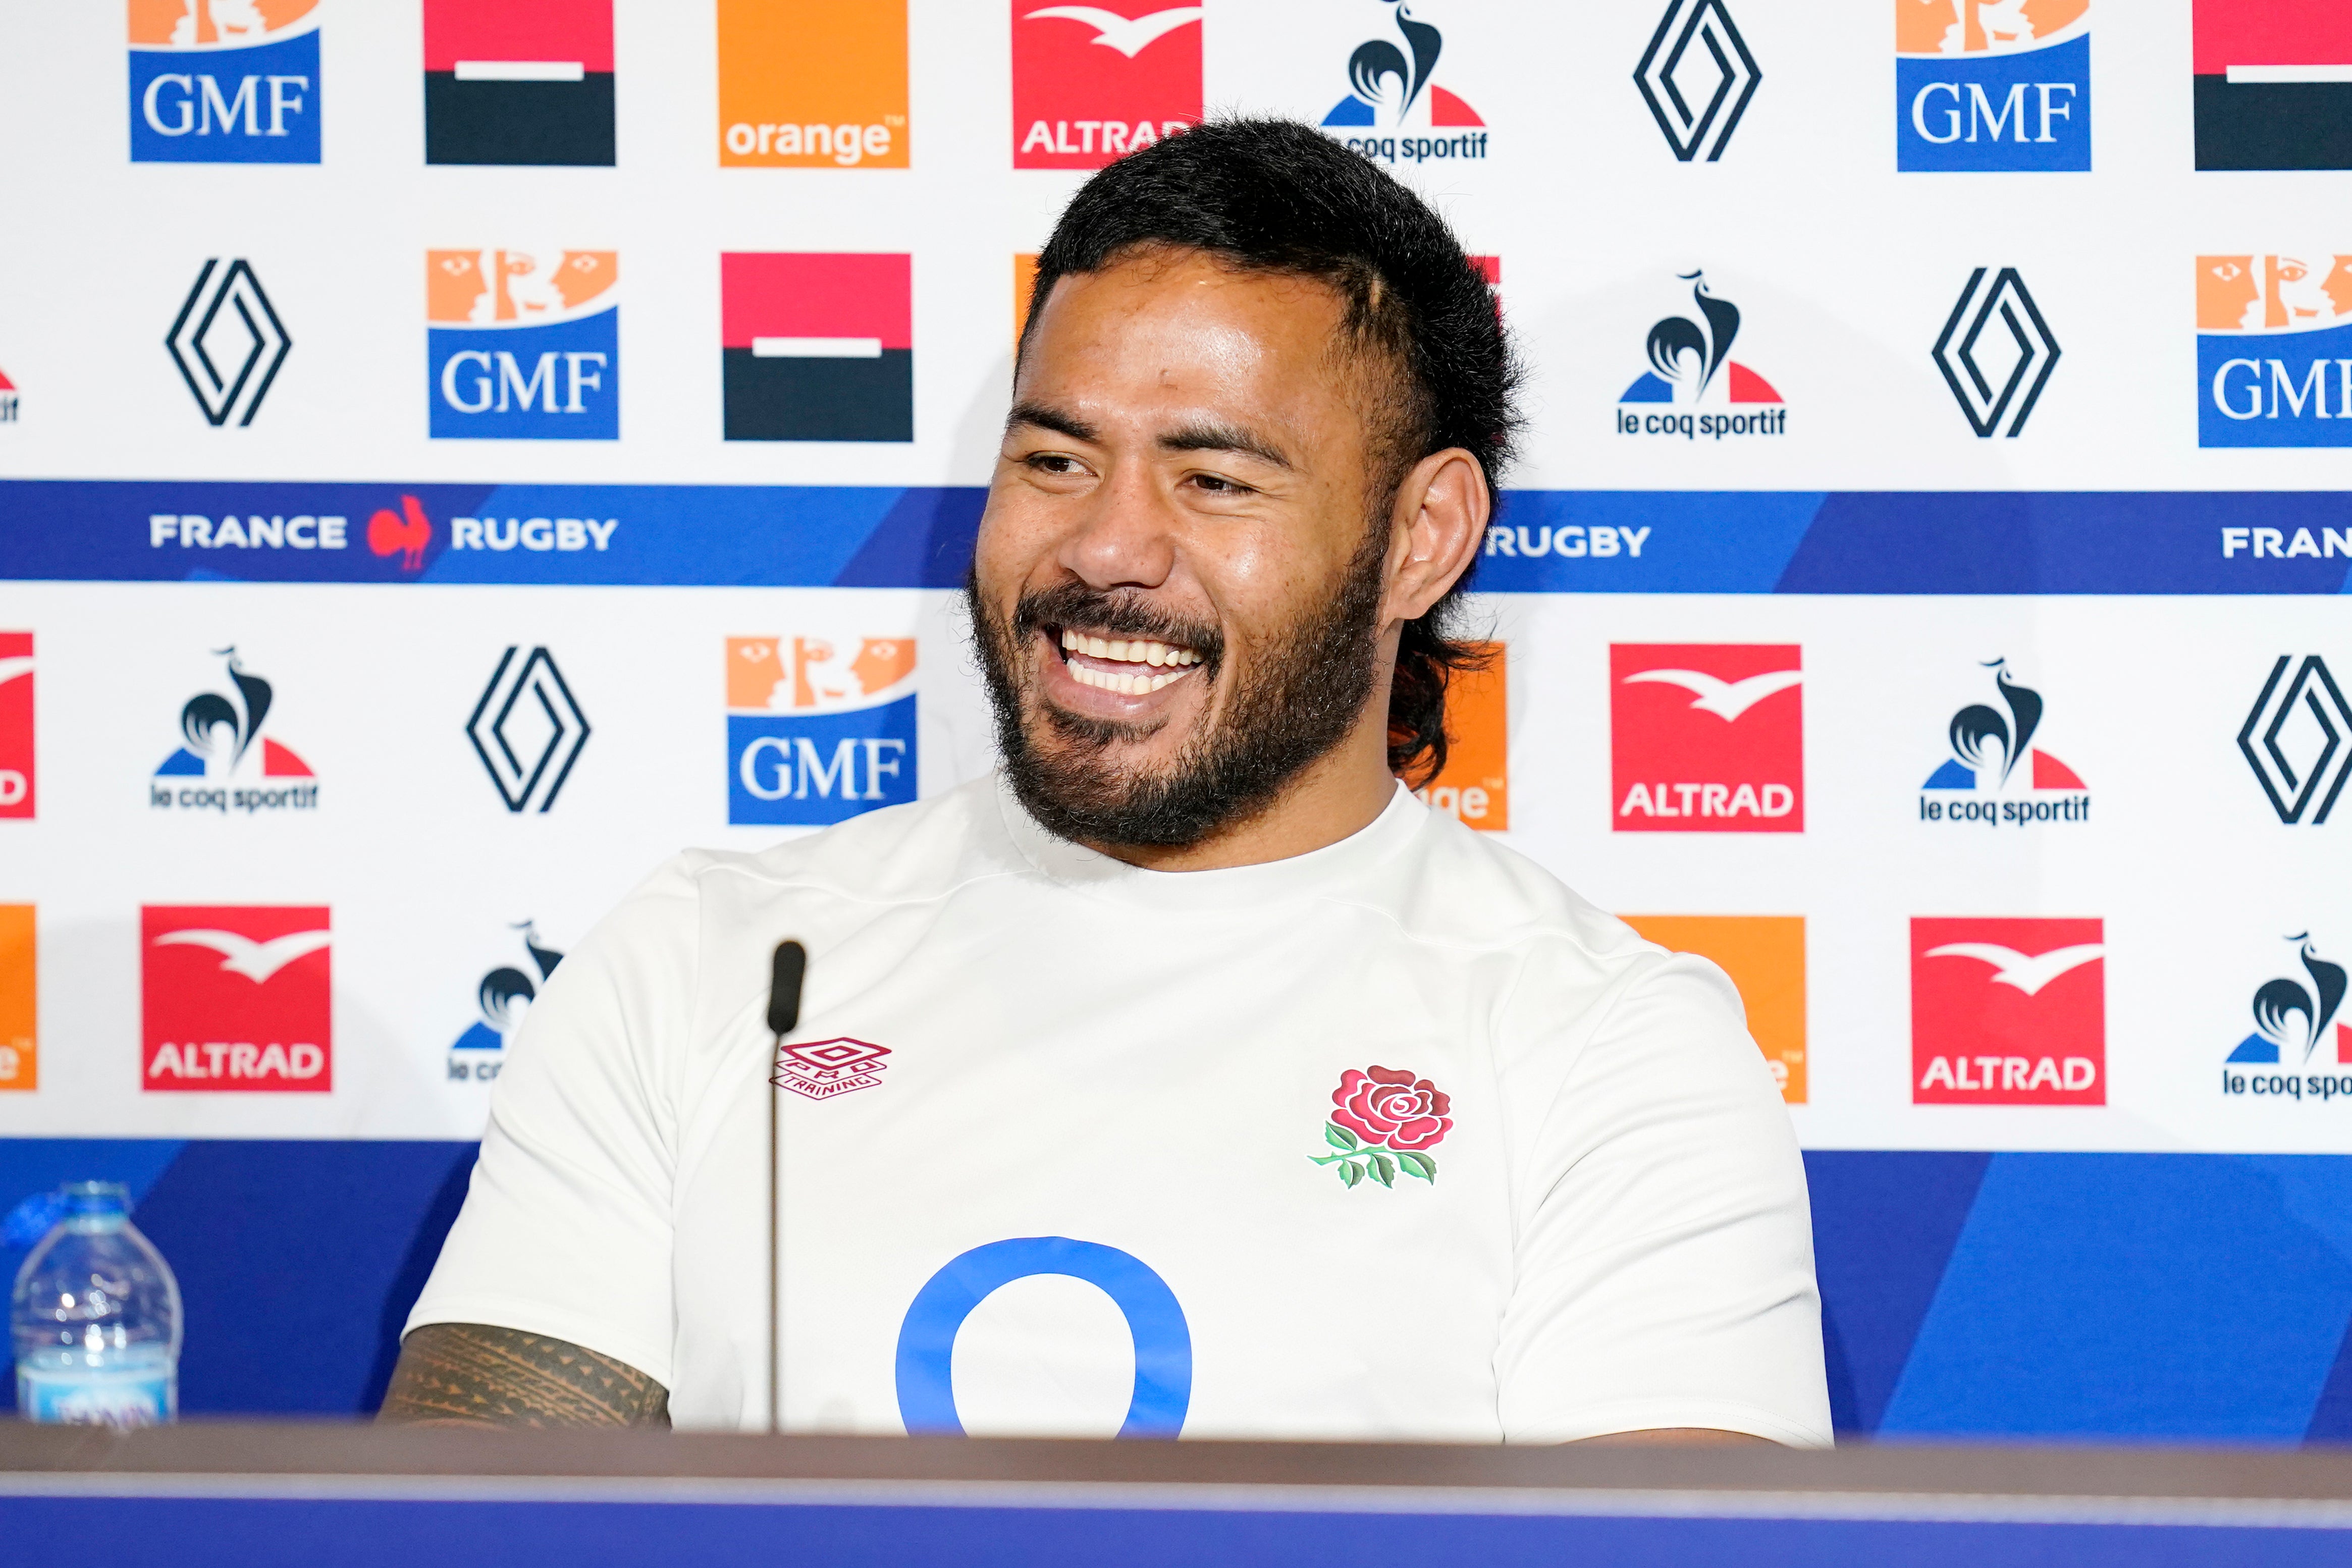 Manu Tuilagi has returned to the England matchday squad for the game against France